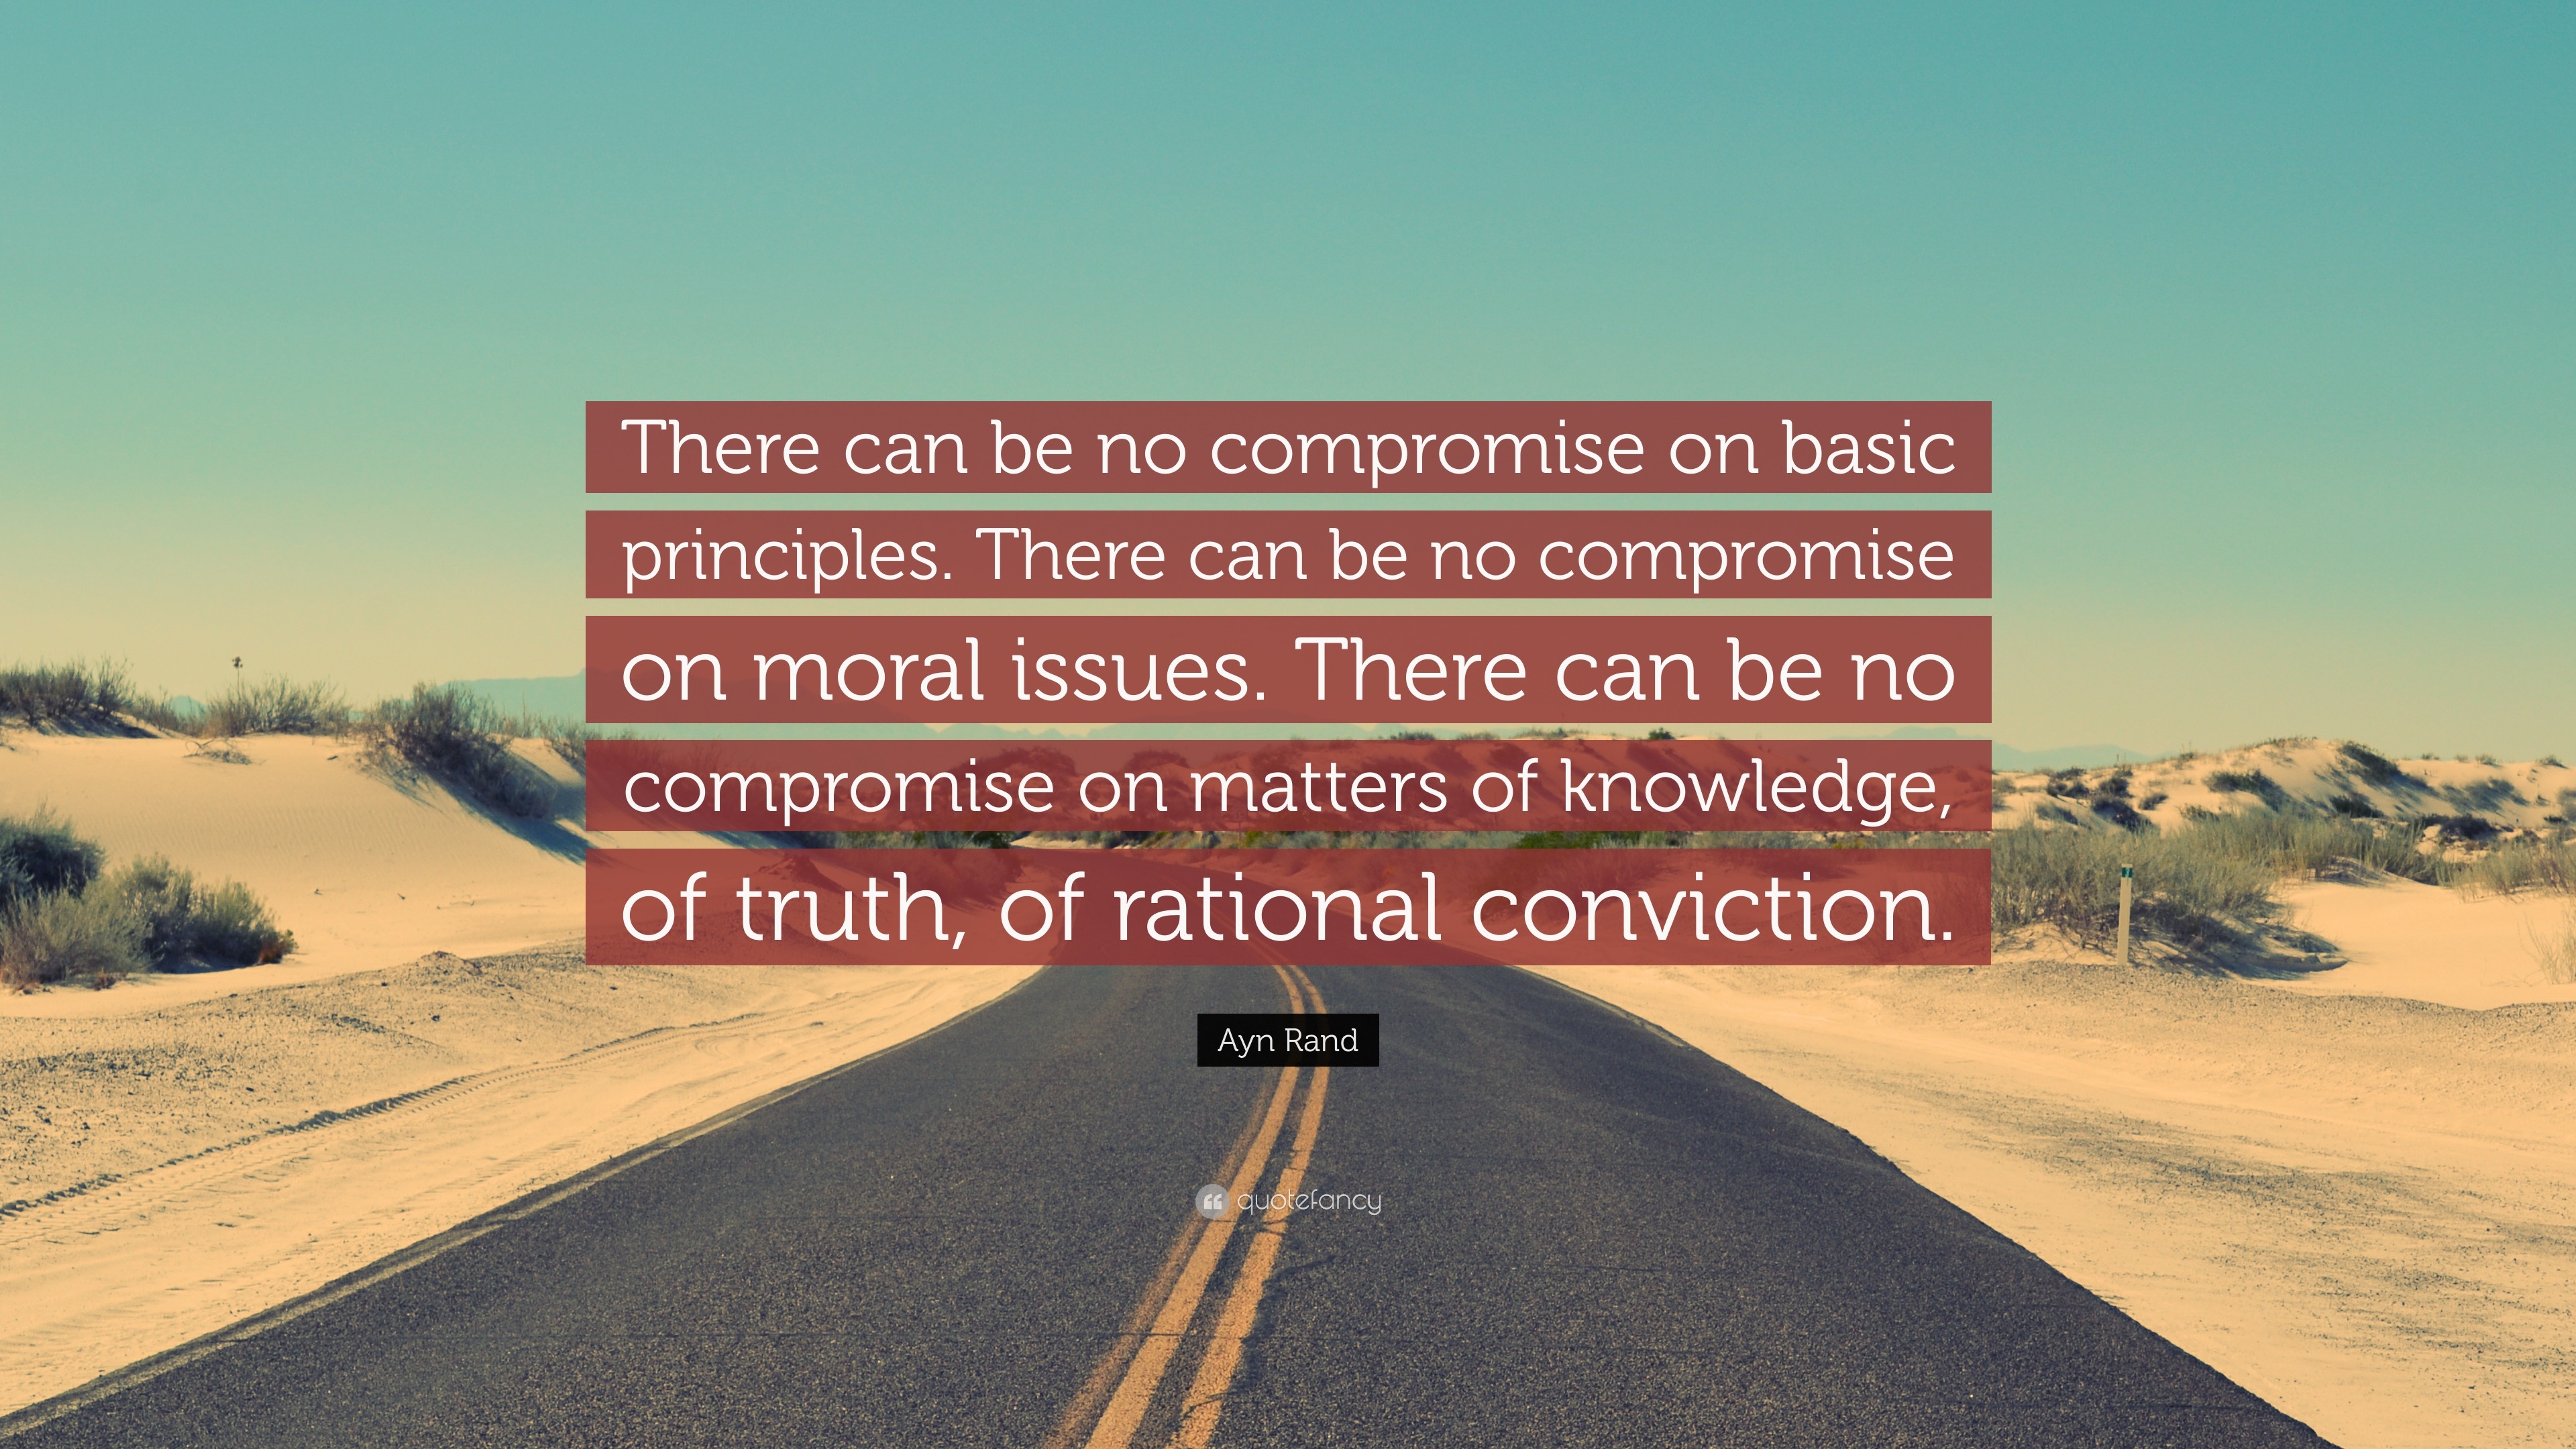 Ayn Rand Quote: “There can be no compromise on basic principles. There can  be no compromise on moral issues. There can be no compromise o”